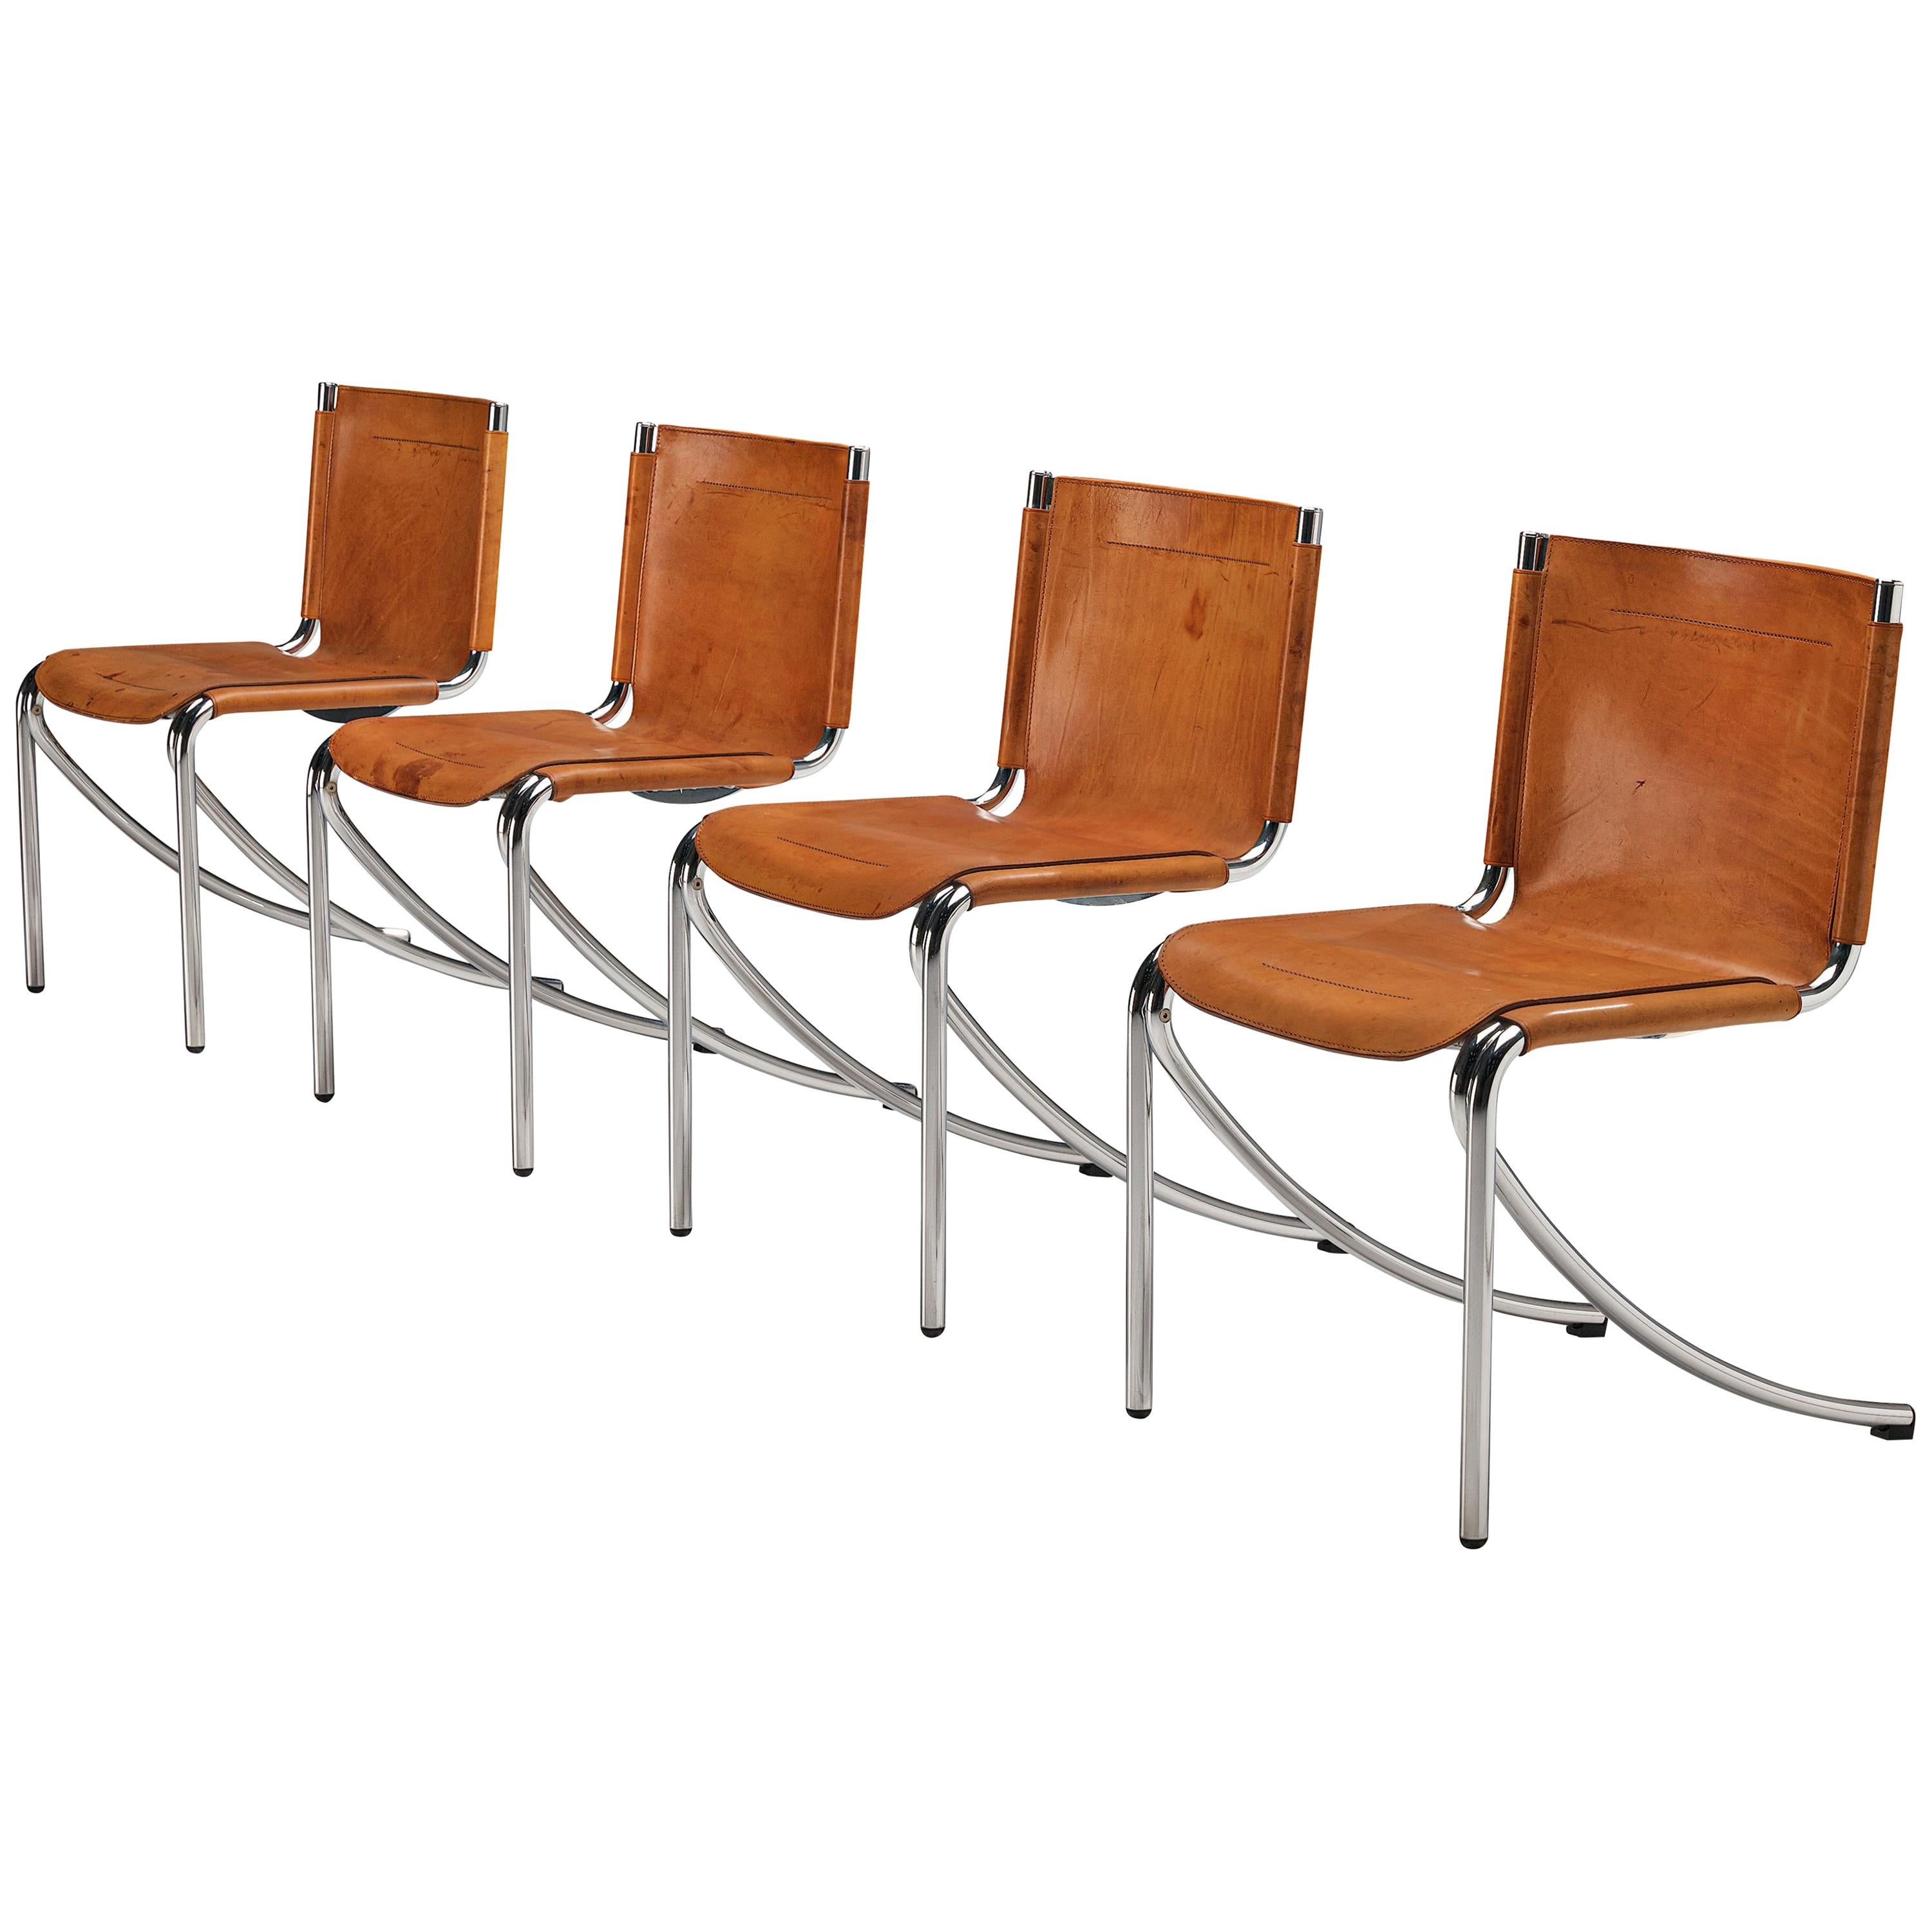 Giotto Stoppino Set of Four Dining Chairs Model ‘Jot’ in Cognac Leather